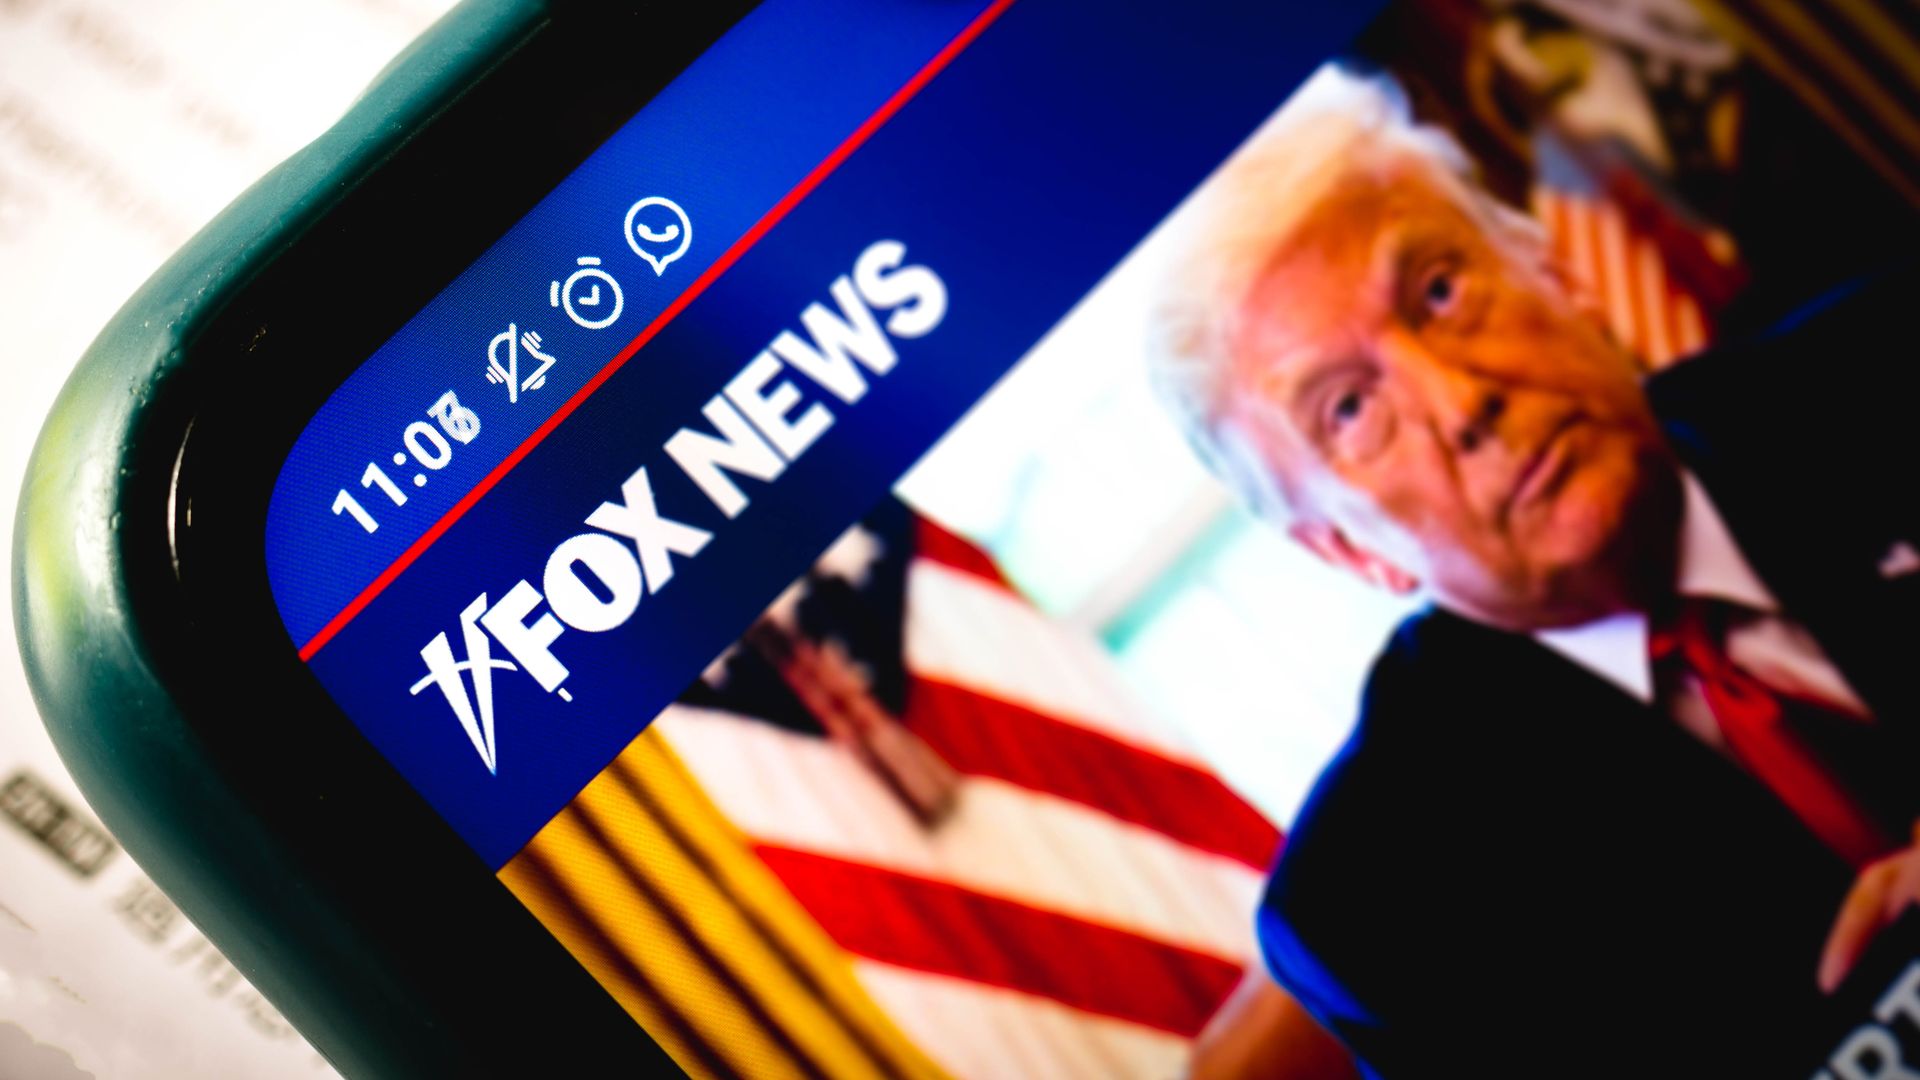 Photo of a phone screen showing the Fox News website and a picture of Donald Trump